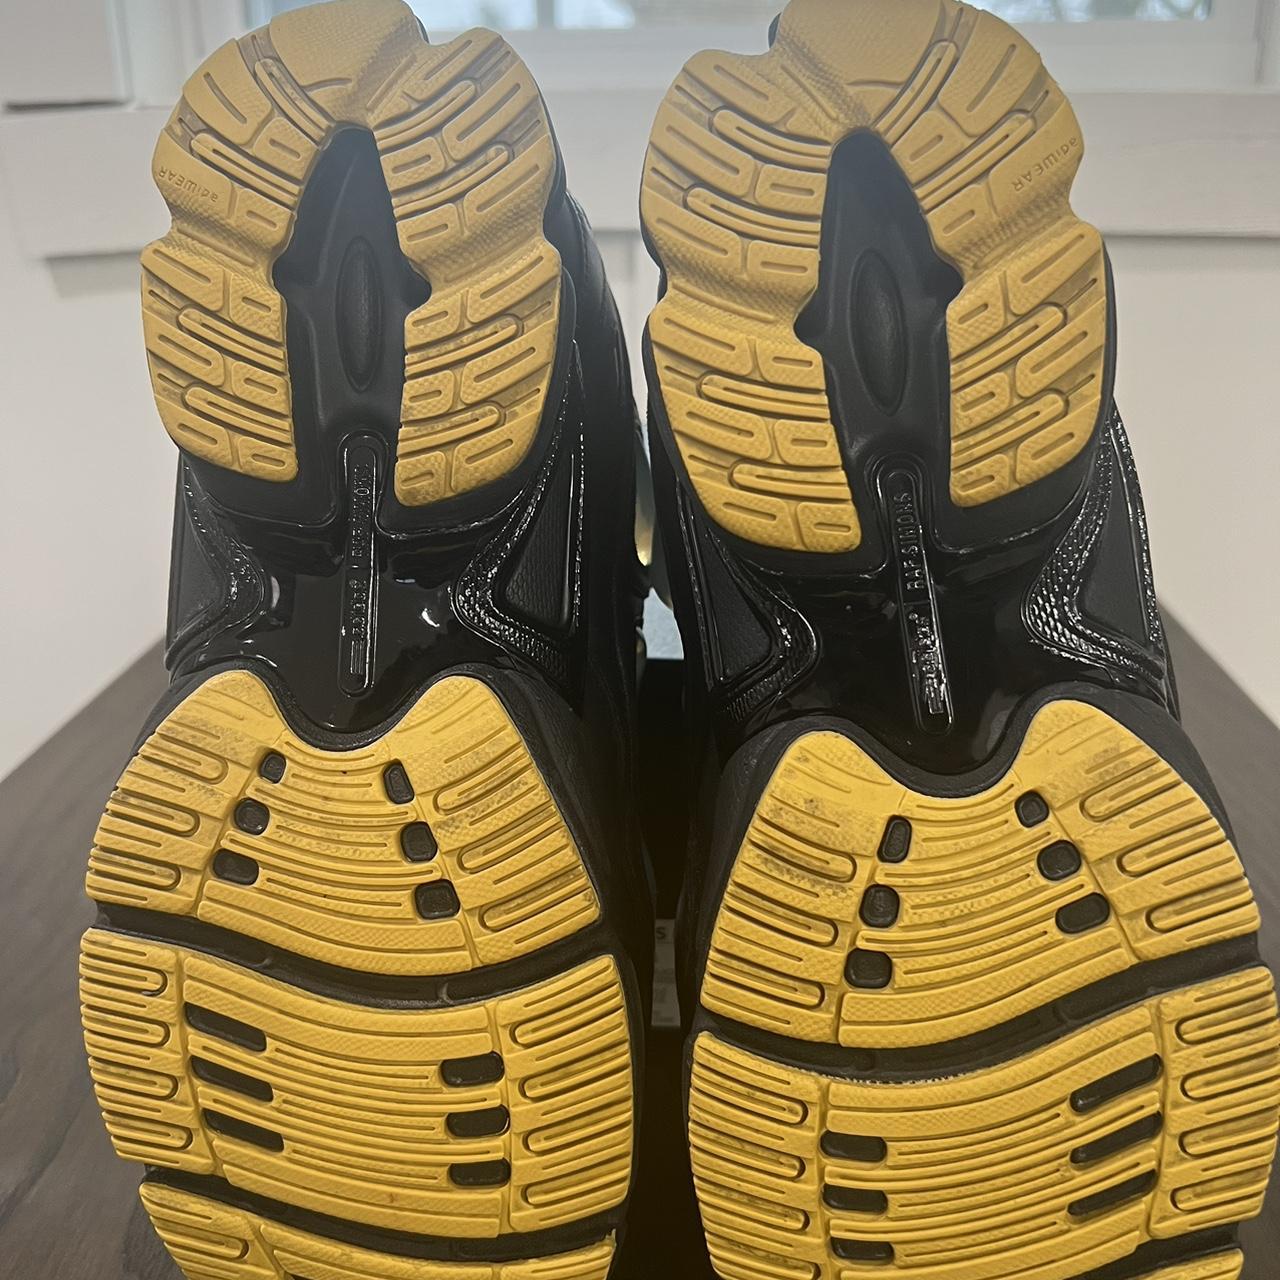 Raf Simons Men's Black and Yellow Trainers (2)